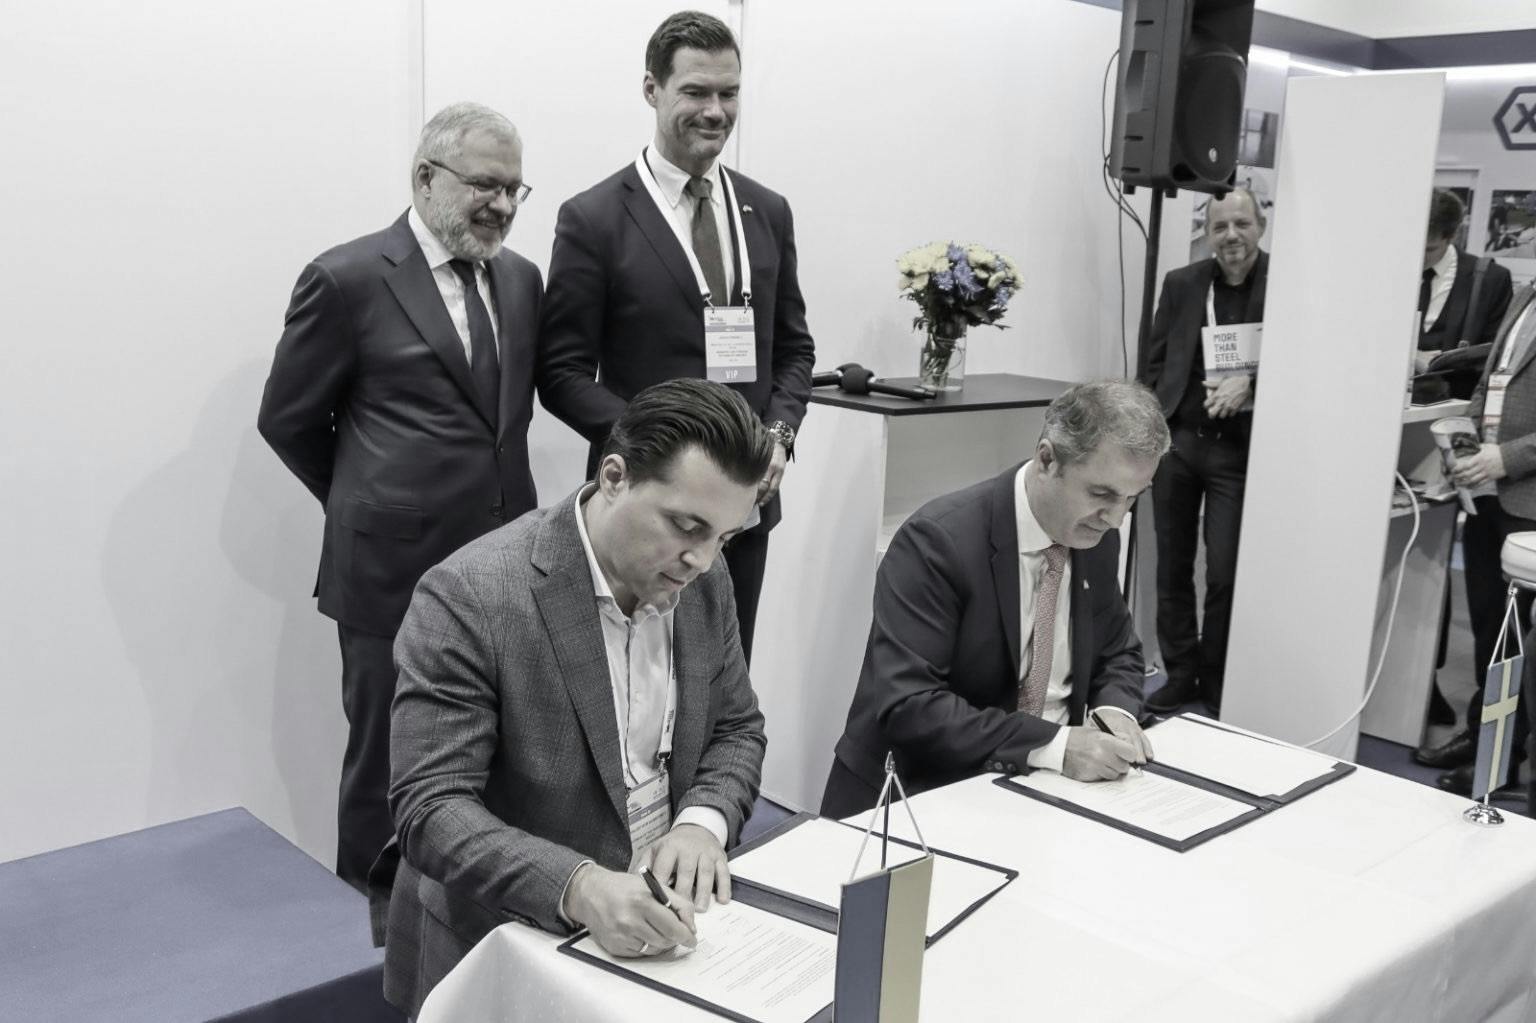 Ingrid Capacity and Ukrenergo to cooperate on energy storages to secure Ukraine’s power system